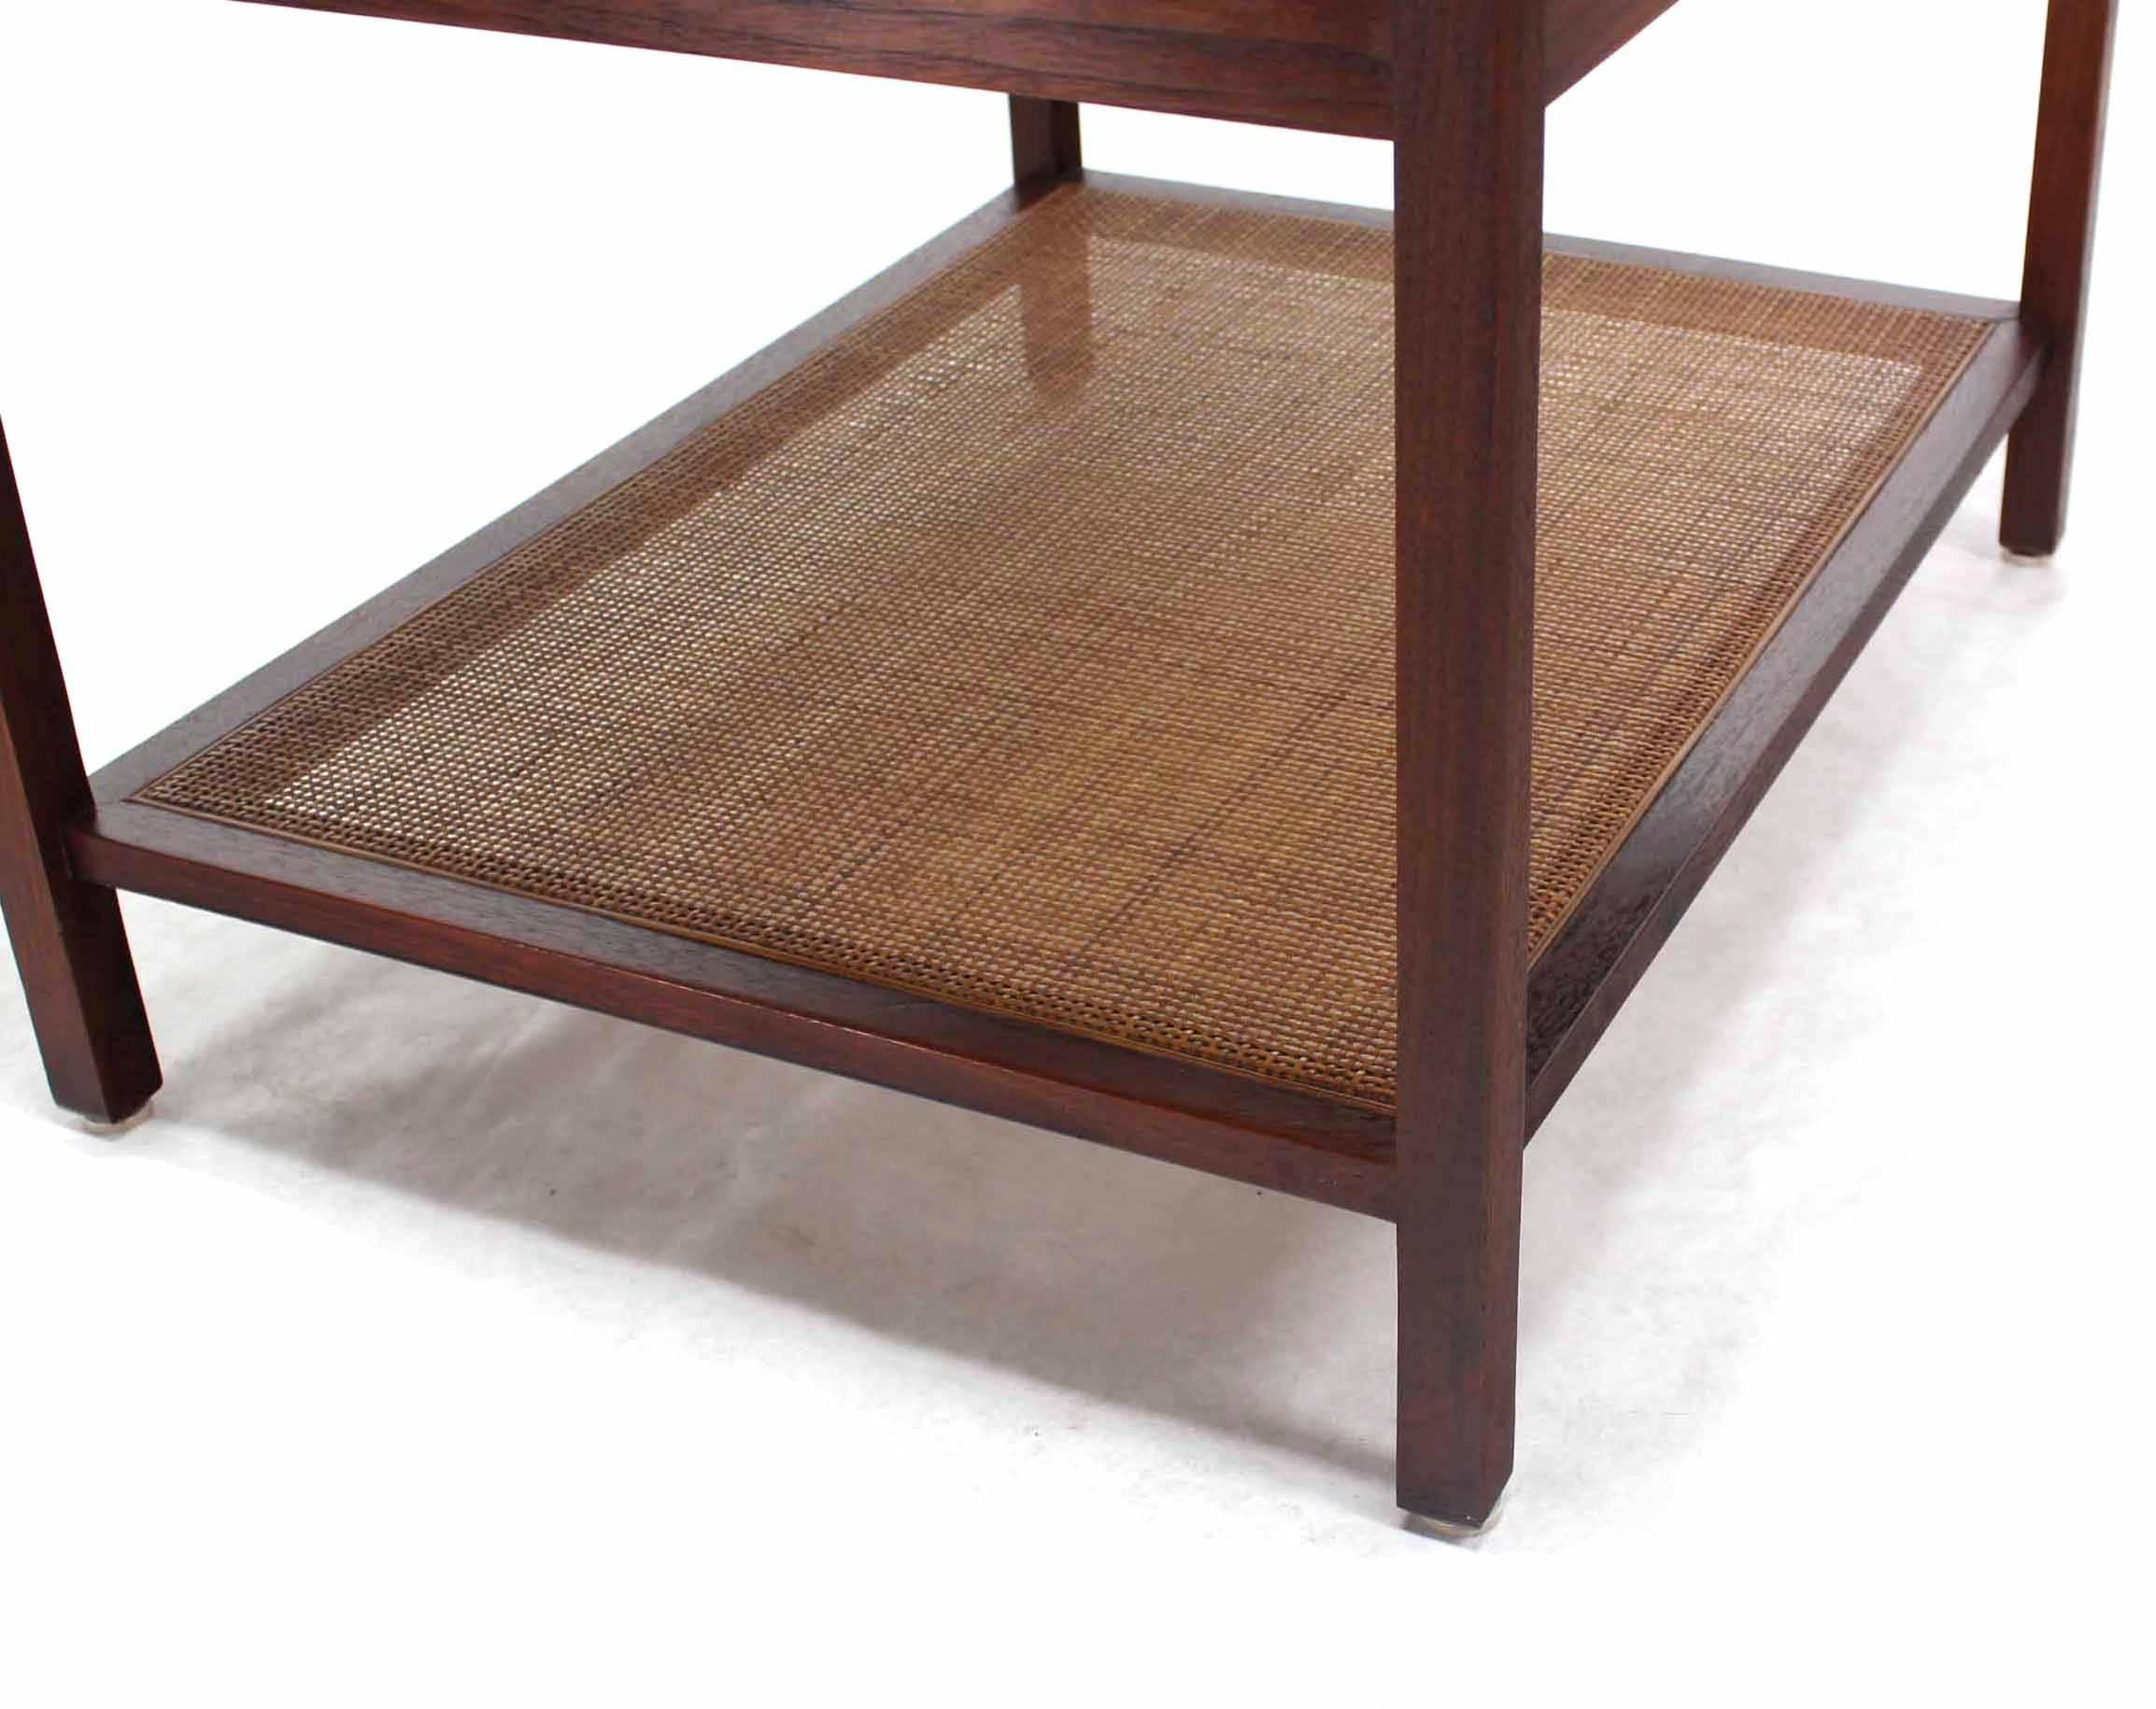 Lacquered Walnut Side End Table with Travertine Insert & Cane Shelf